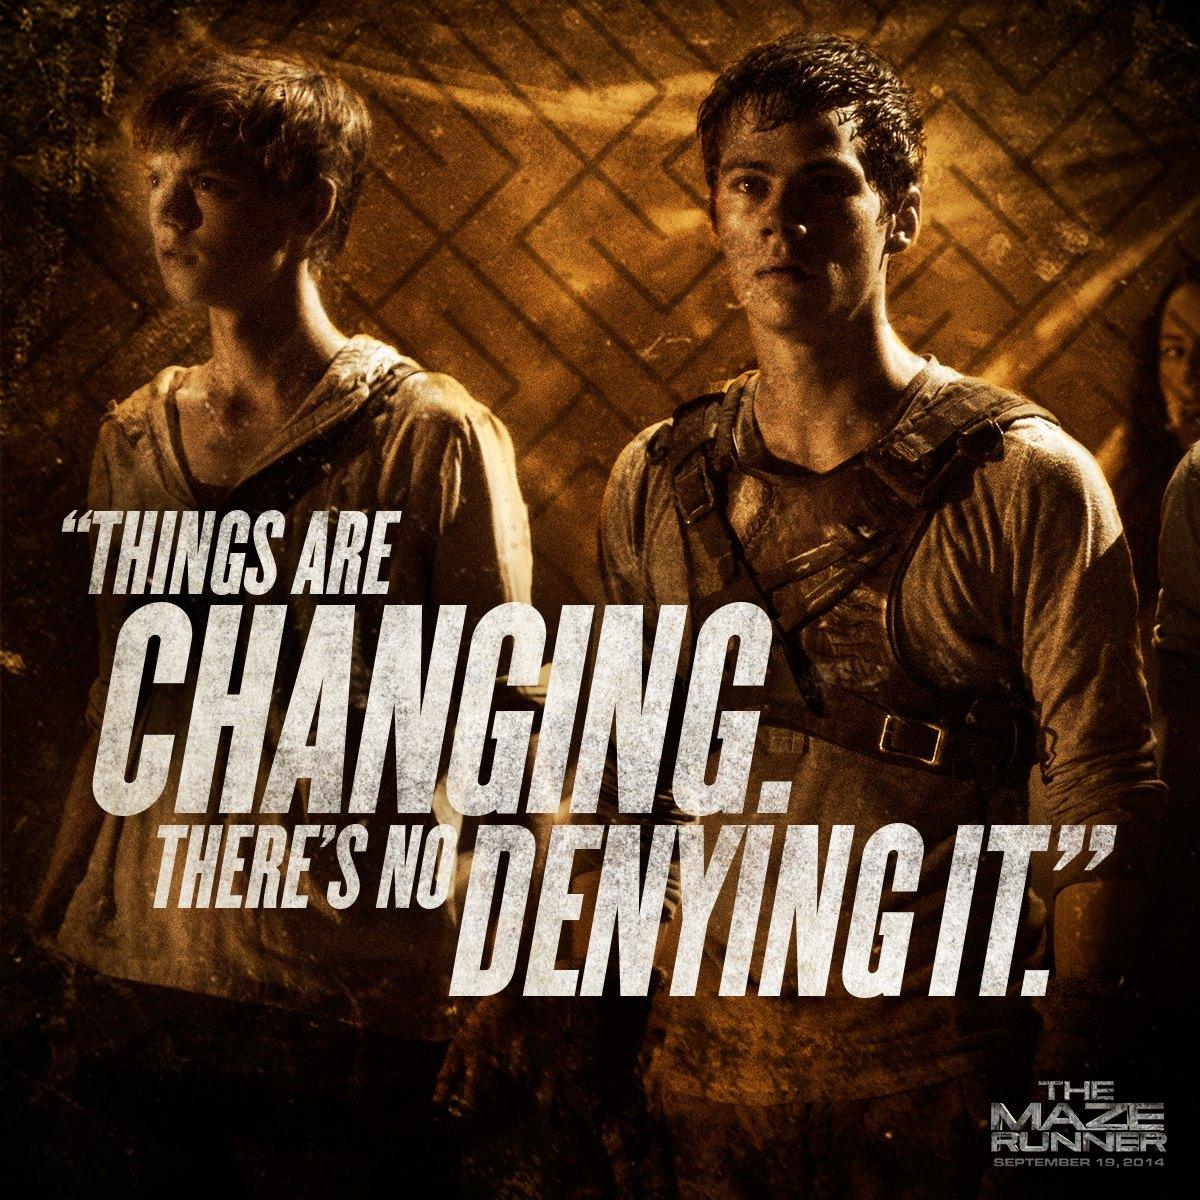 image about The Maze Runner. See more about